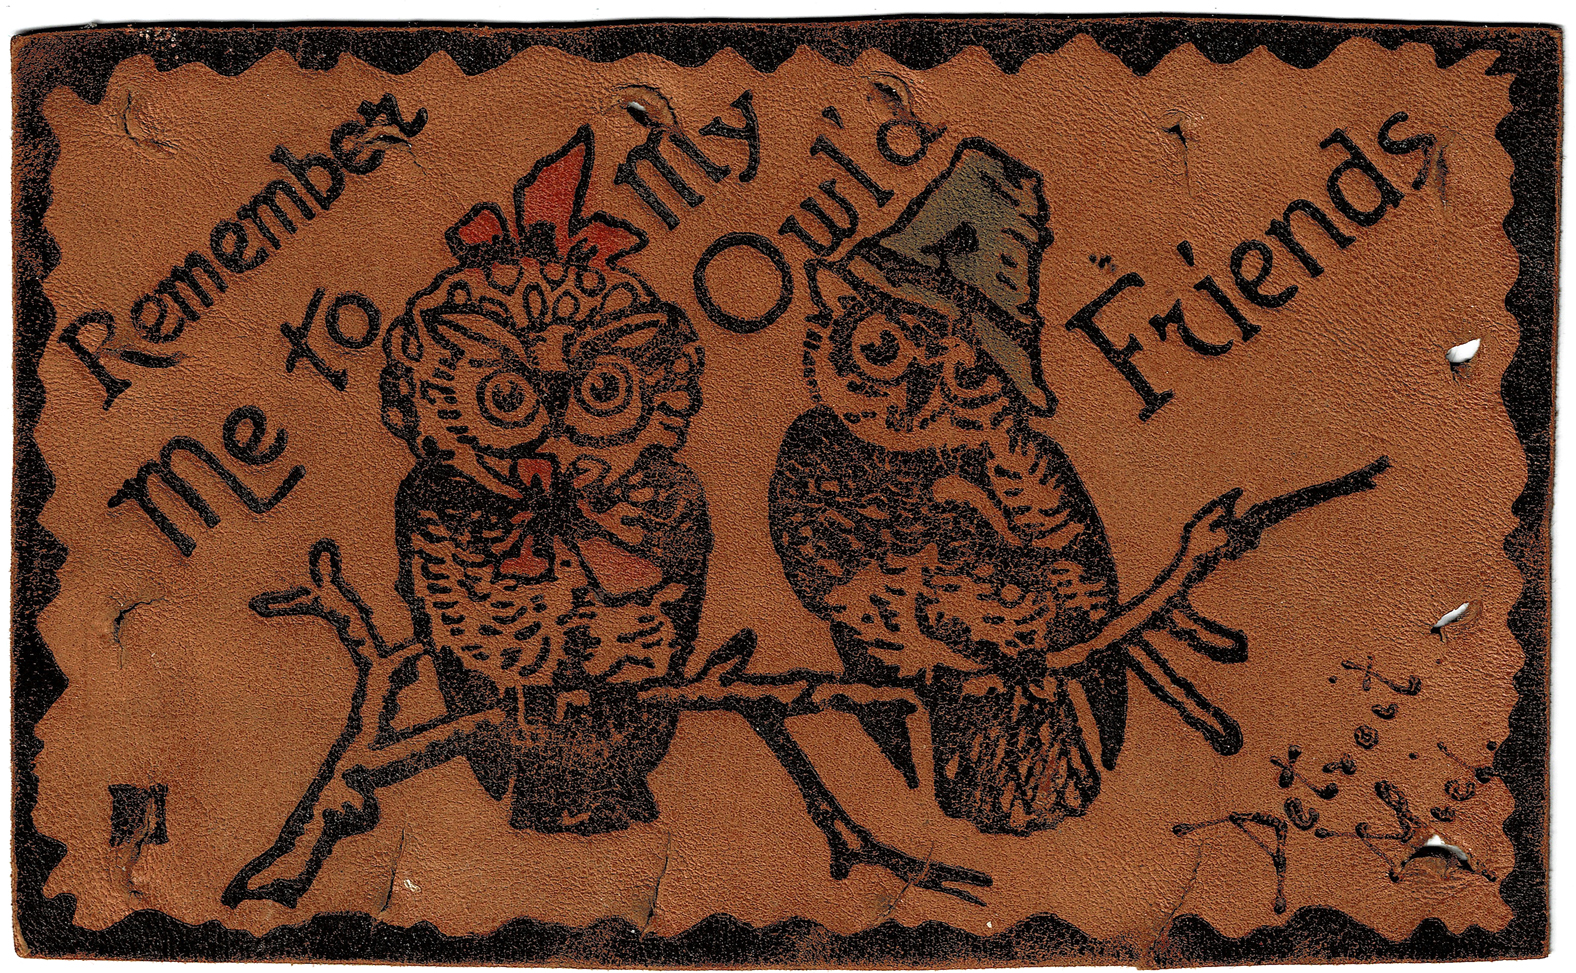 A leather postcard with two owls on it, one wearing a bonnet and the other wearing a slightly-conical hat. The message is: Remember me to my owl'd friends.